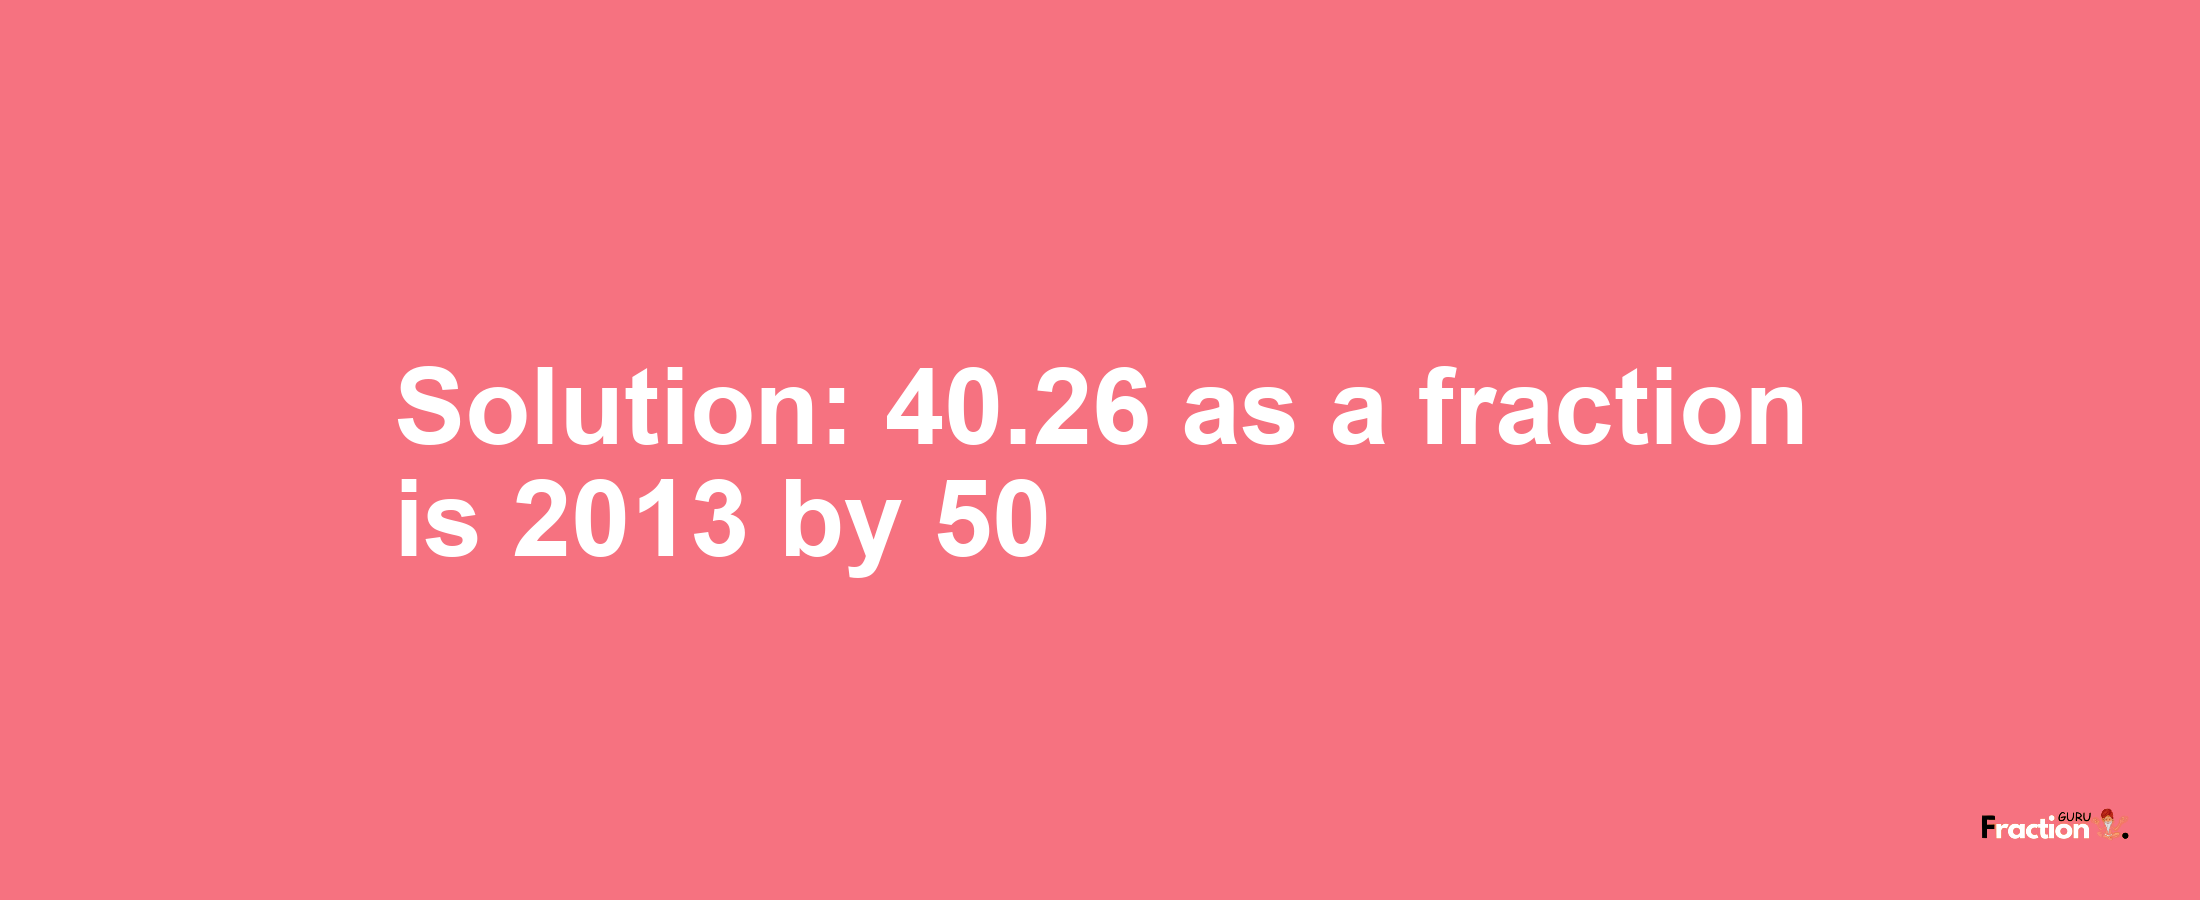 Solution:40.26 as a fraction is 2013/50